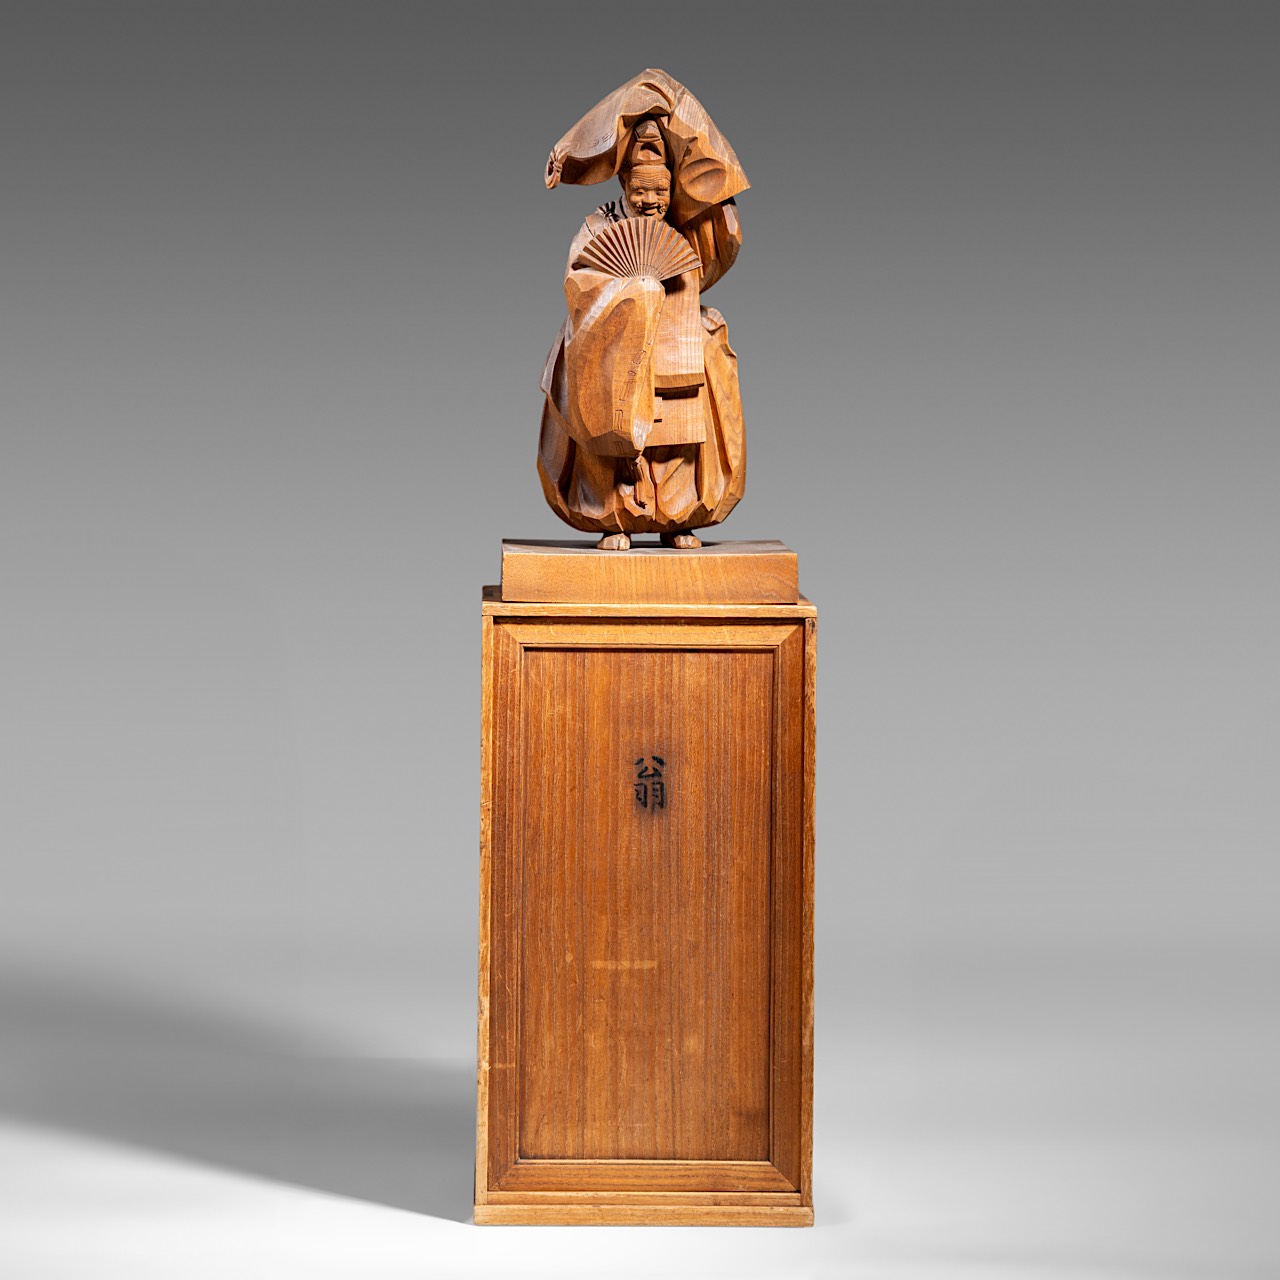 A Japanese cherrywood sculpture of a dancing man, signed Toshiaki Shimamura, total H 47 - 25,5 x 23 - Image 6 of 10